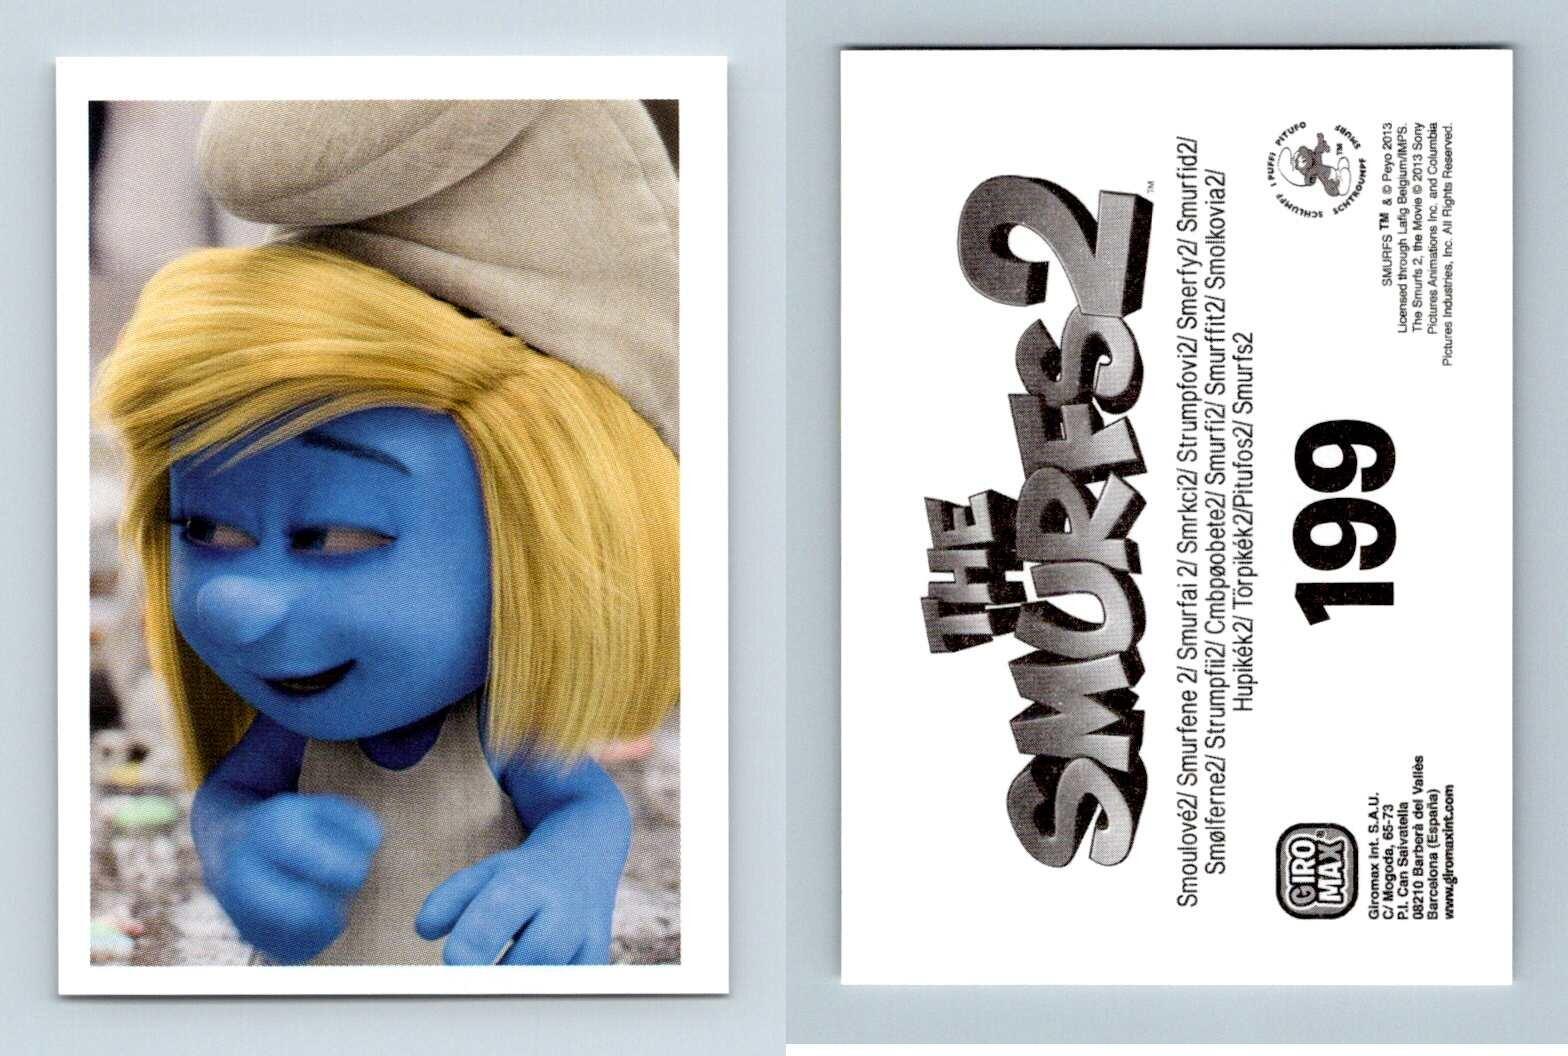 Smurfette, Sony Pictures Animation Wiki